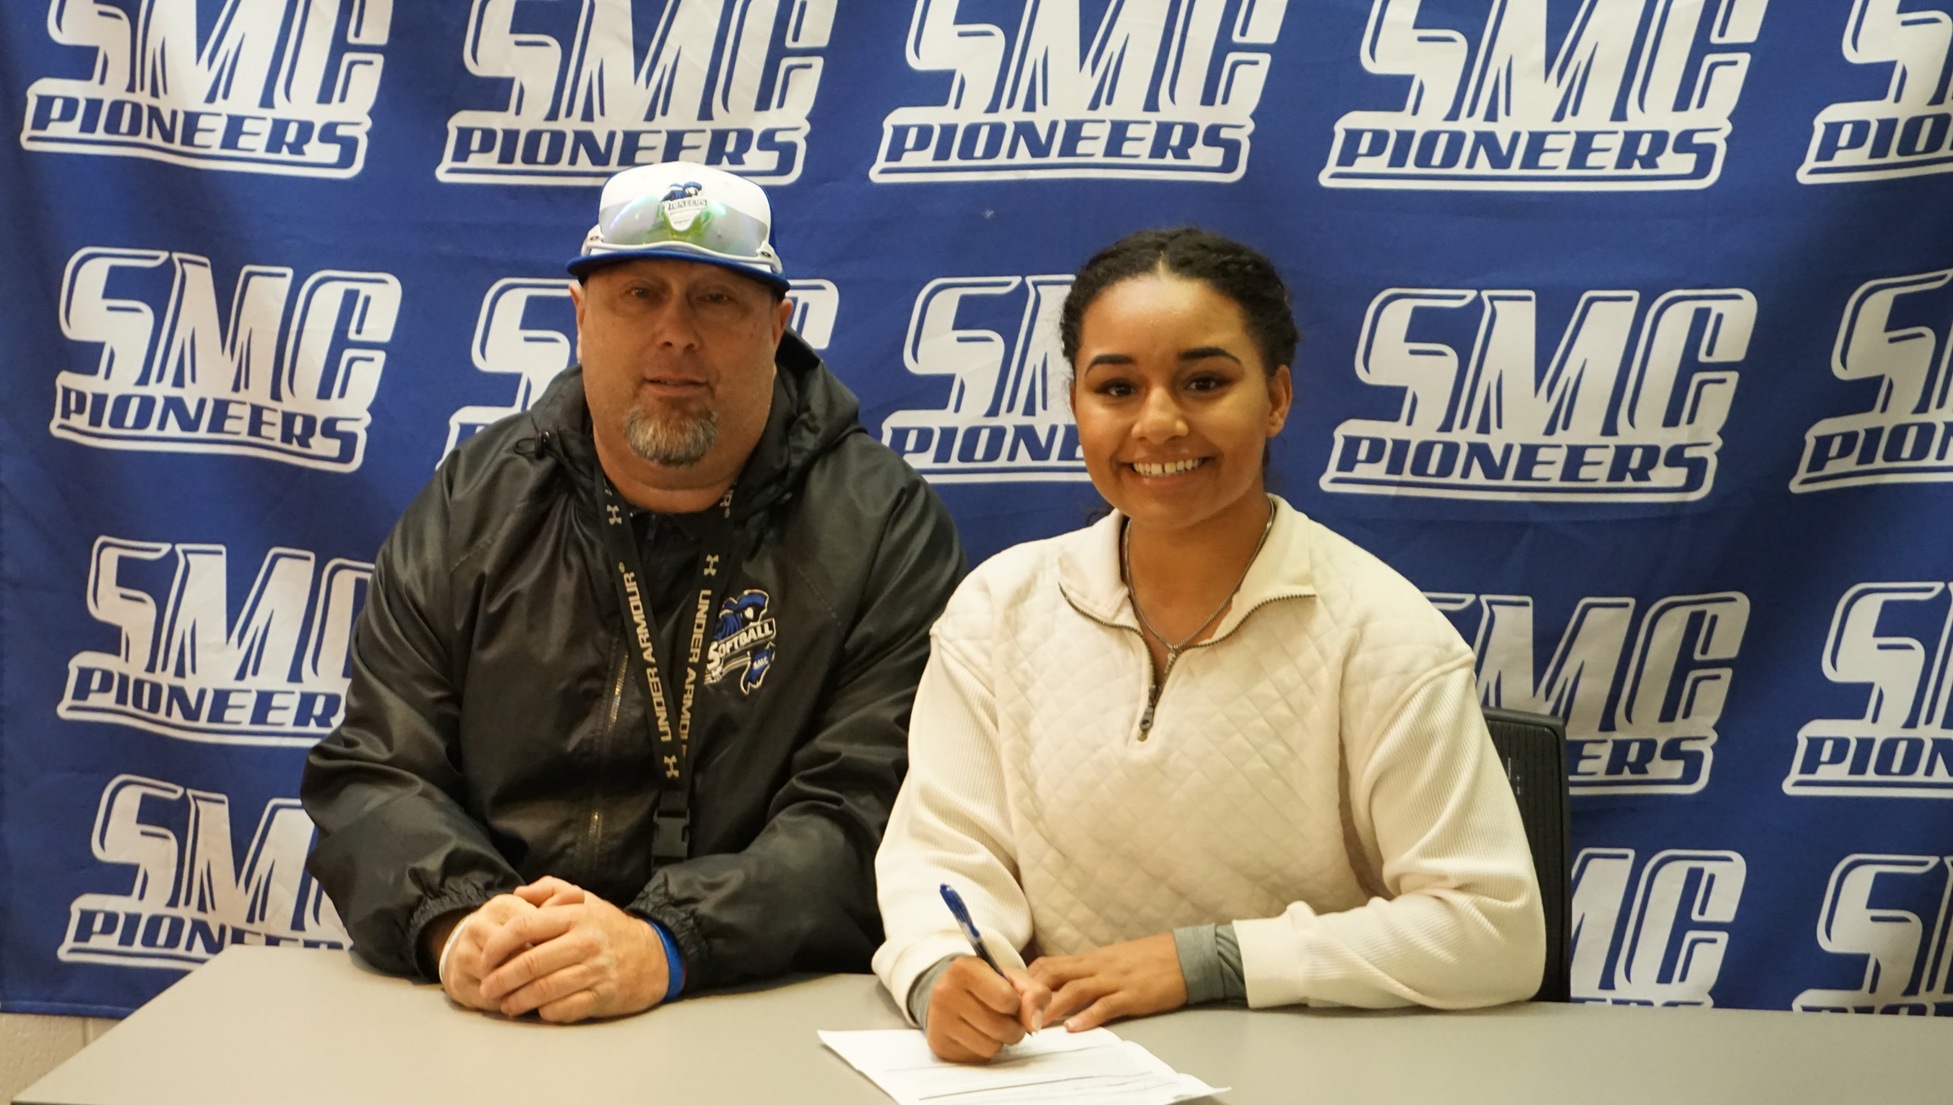 SMC Softball Signs Dienna White, Transfer from PC in Arizona